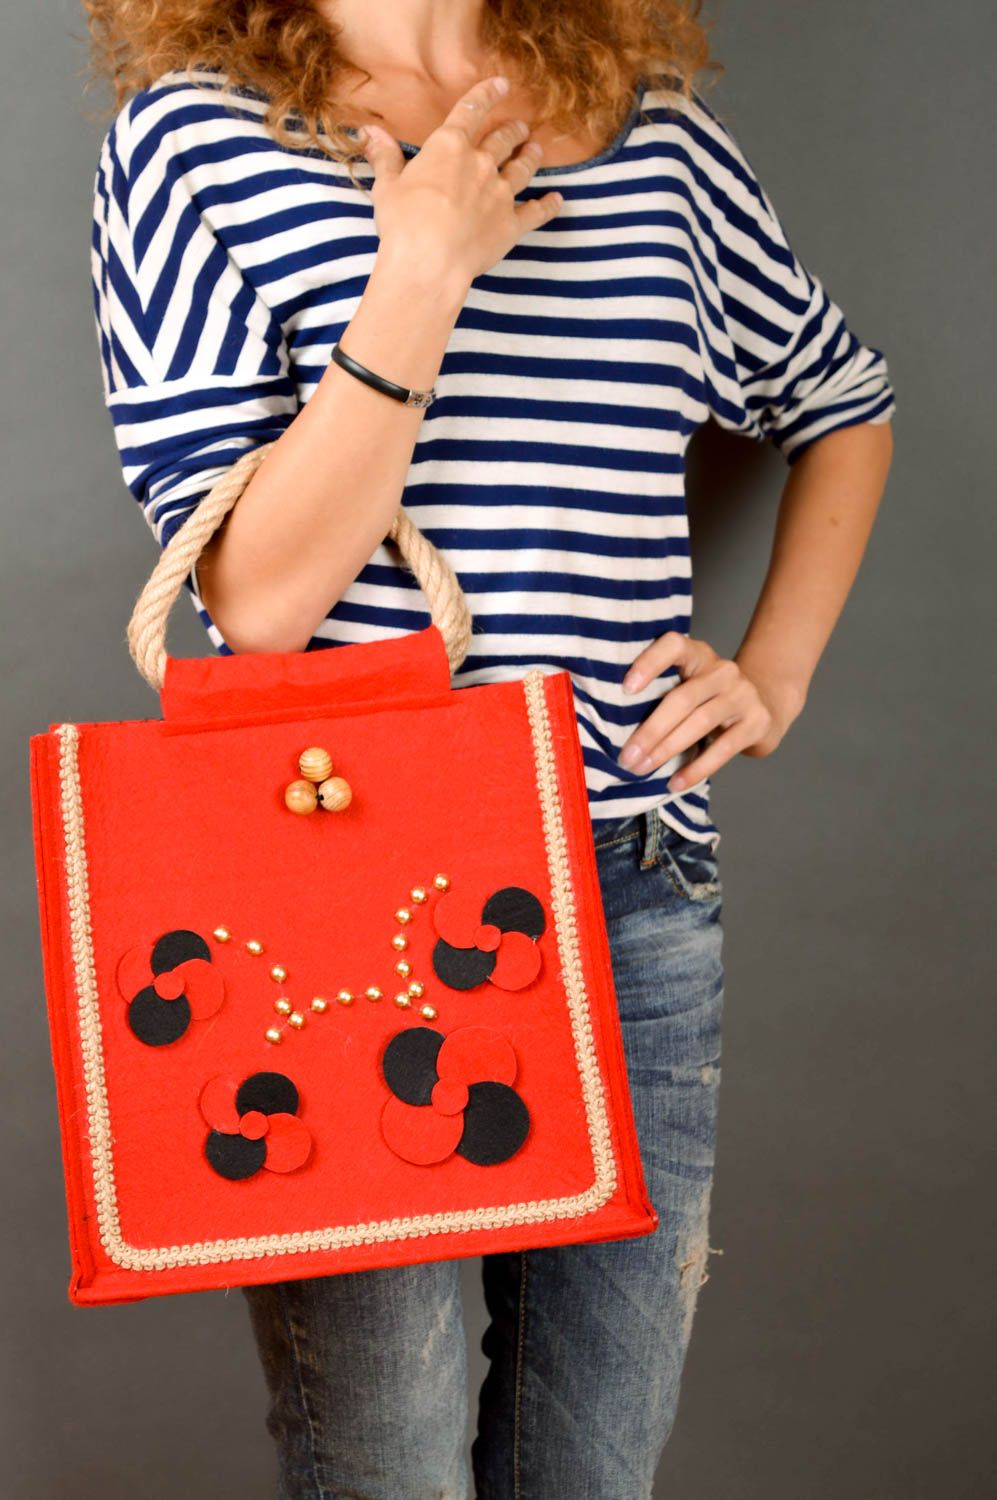 Unusual handmade felt bag fabric bag design fashion trends gifts for her photo 5